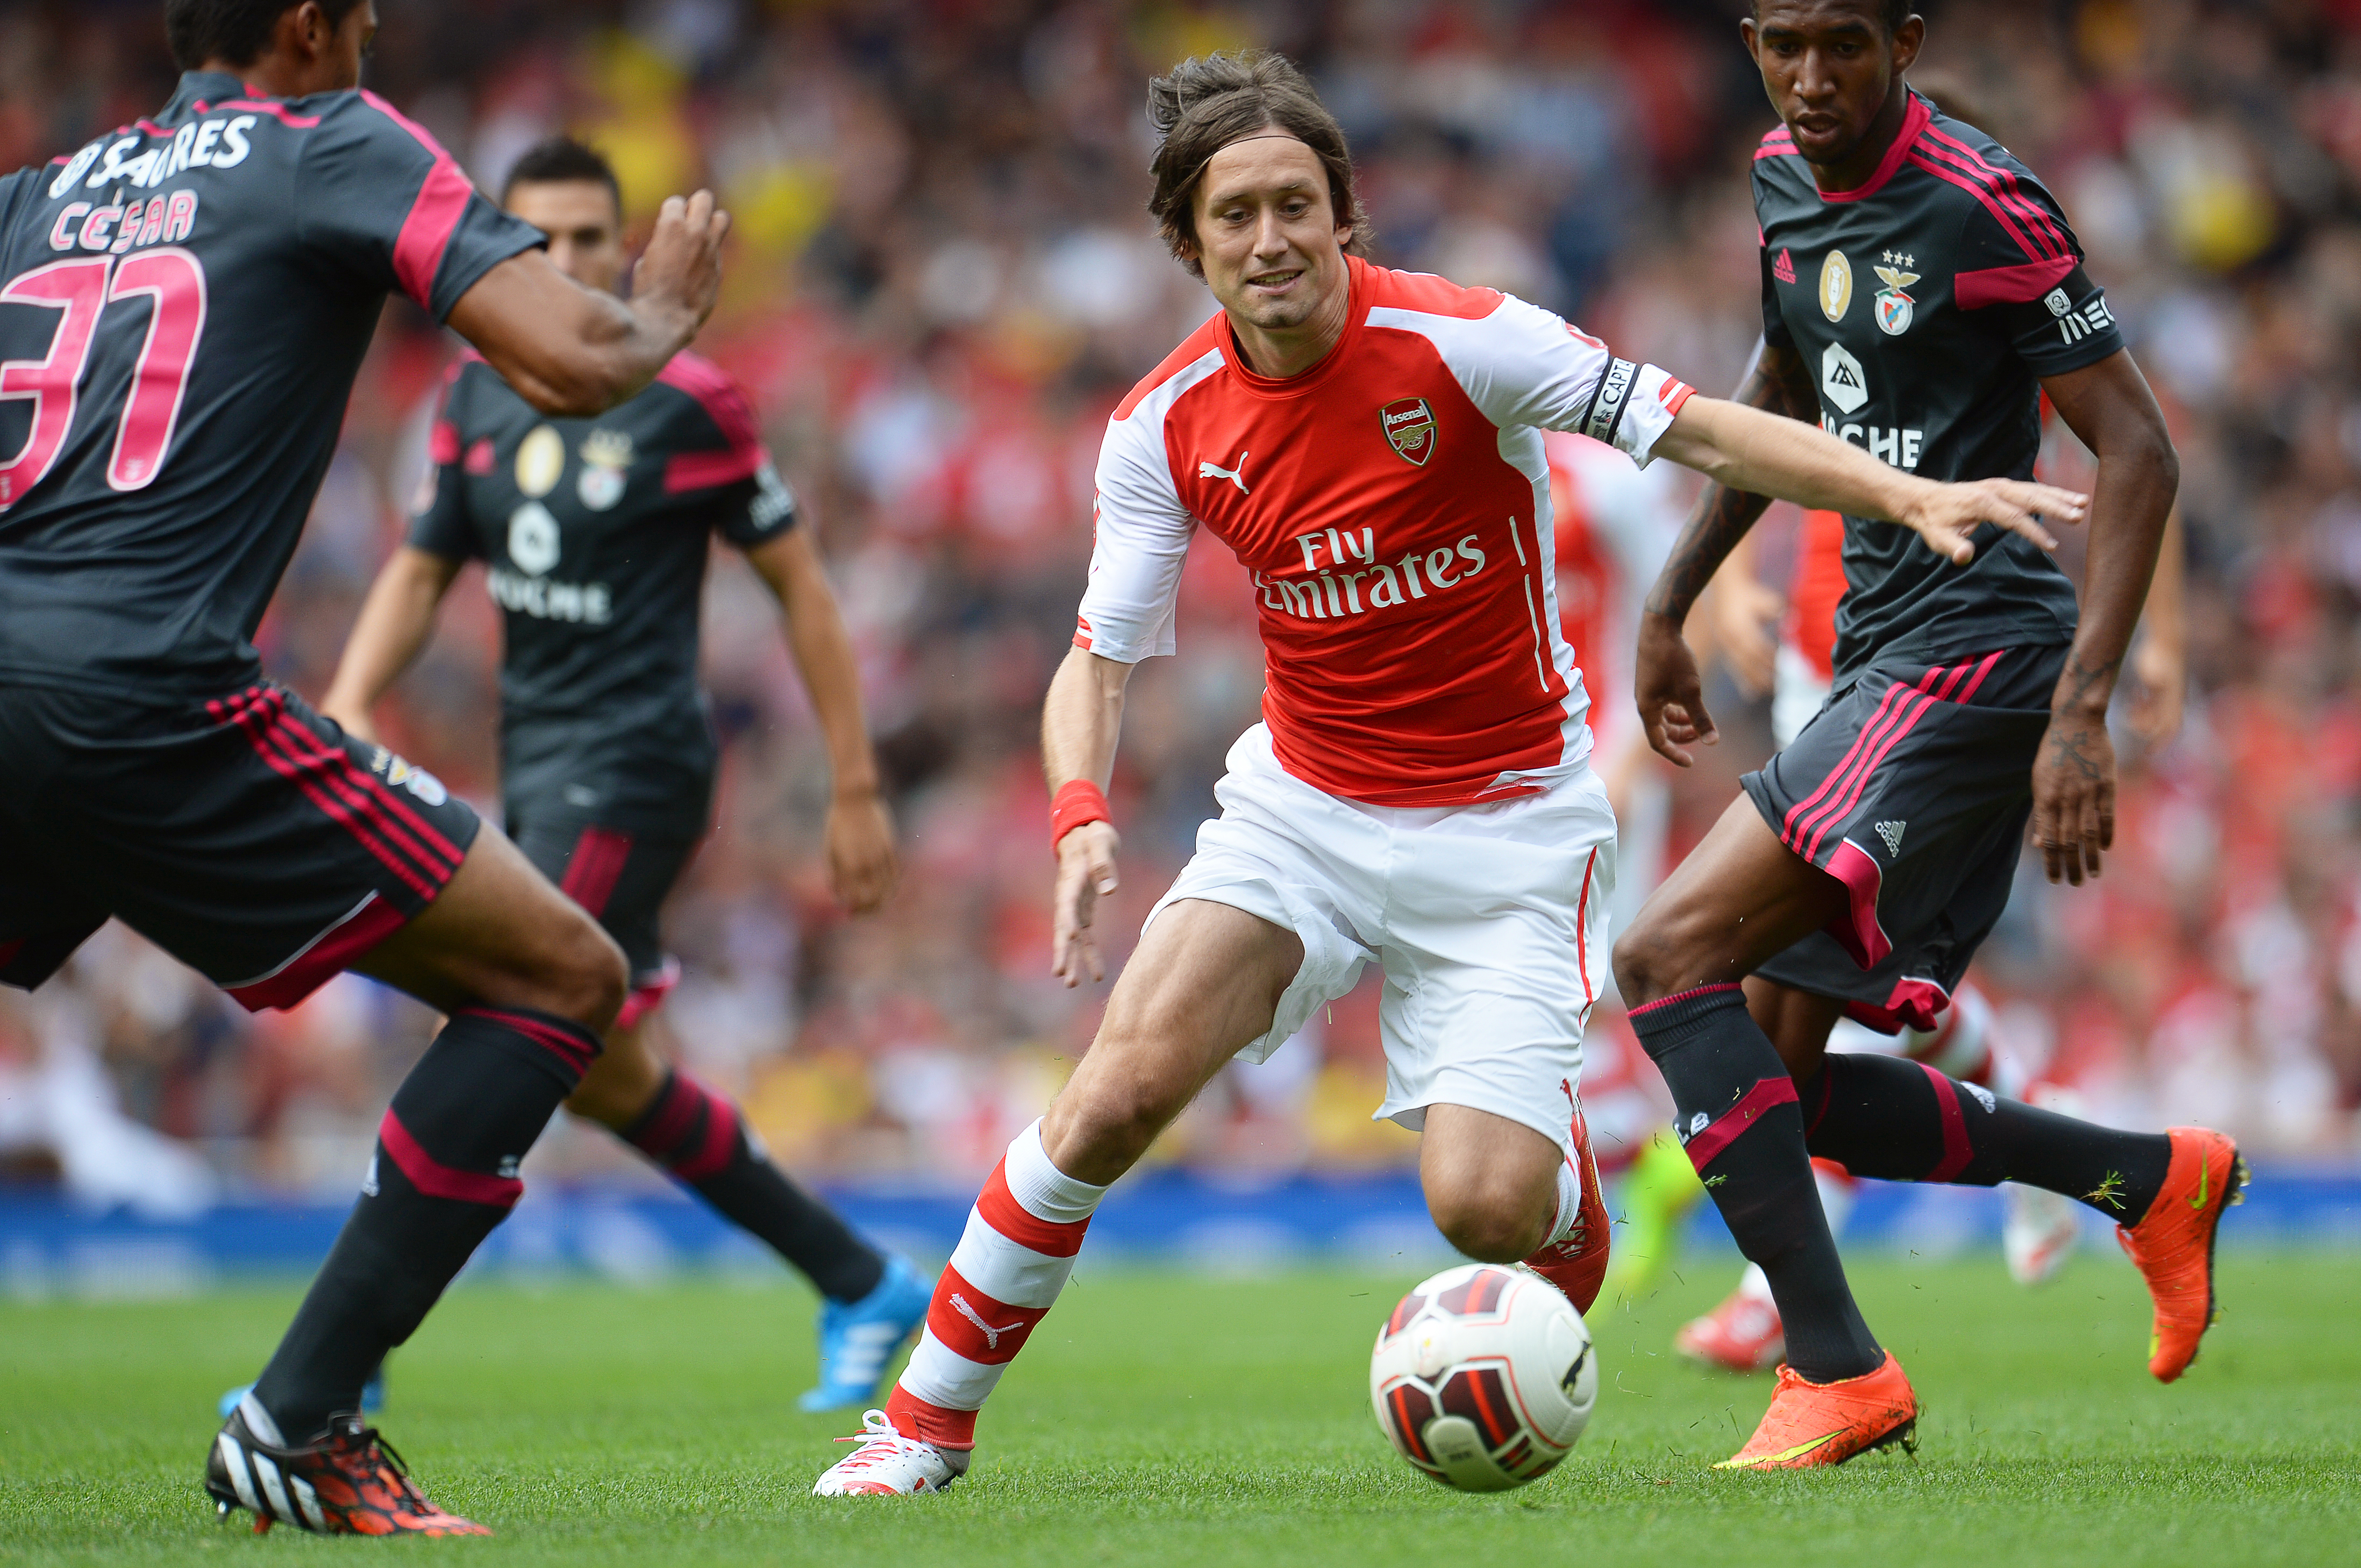 epa04338834 Tomas Rosicky (C) of Arsenal in action during the Emirates Cup soccer match between Arsenal FC and Benfica Lisbon in London, Britain, 02 August 2014. The Emirates Cup is a pre-season friendly tournament played between Arsenal FC, Valencia CF, AS Monaco and Benfica.  EPA/ANDY RAIN